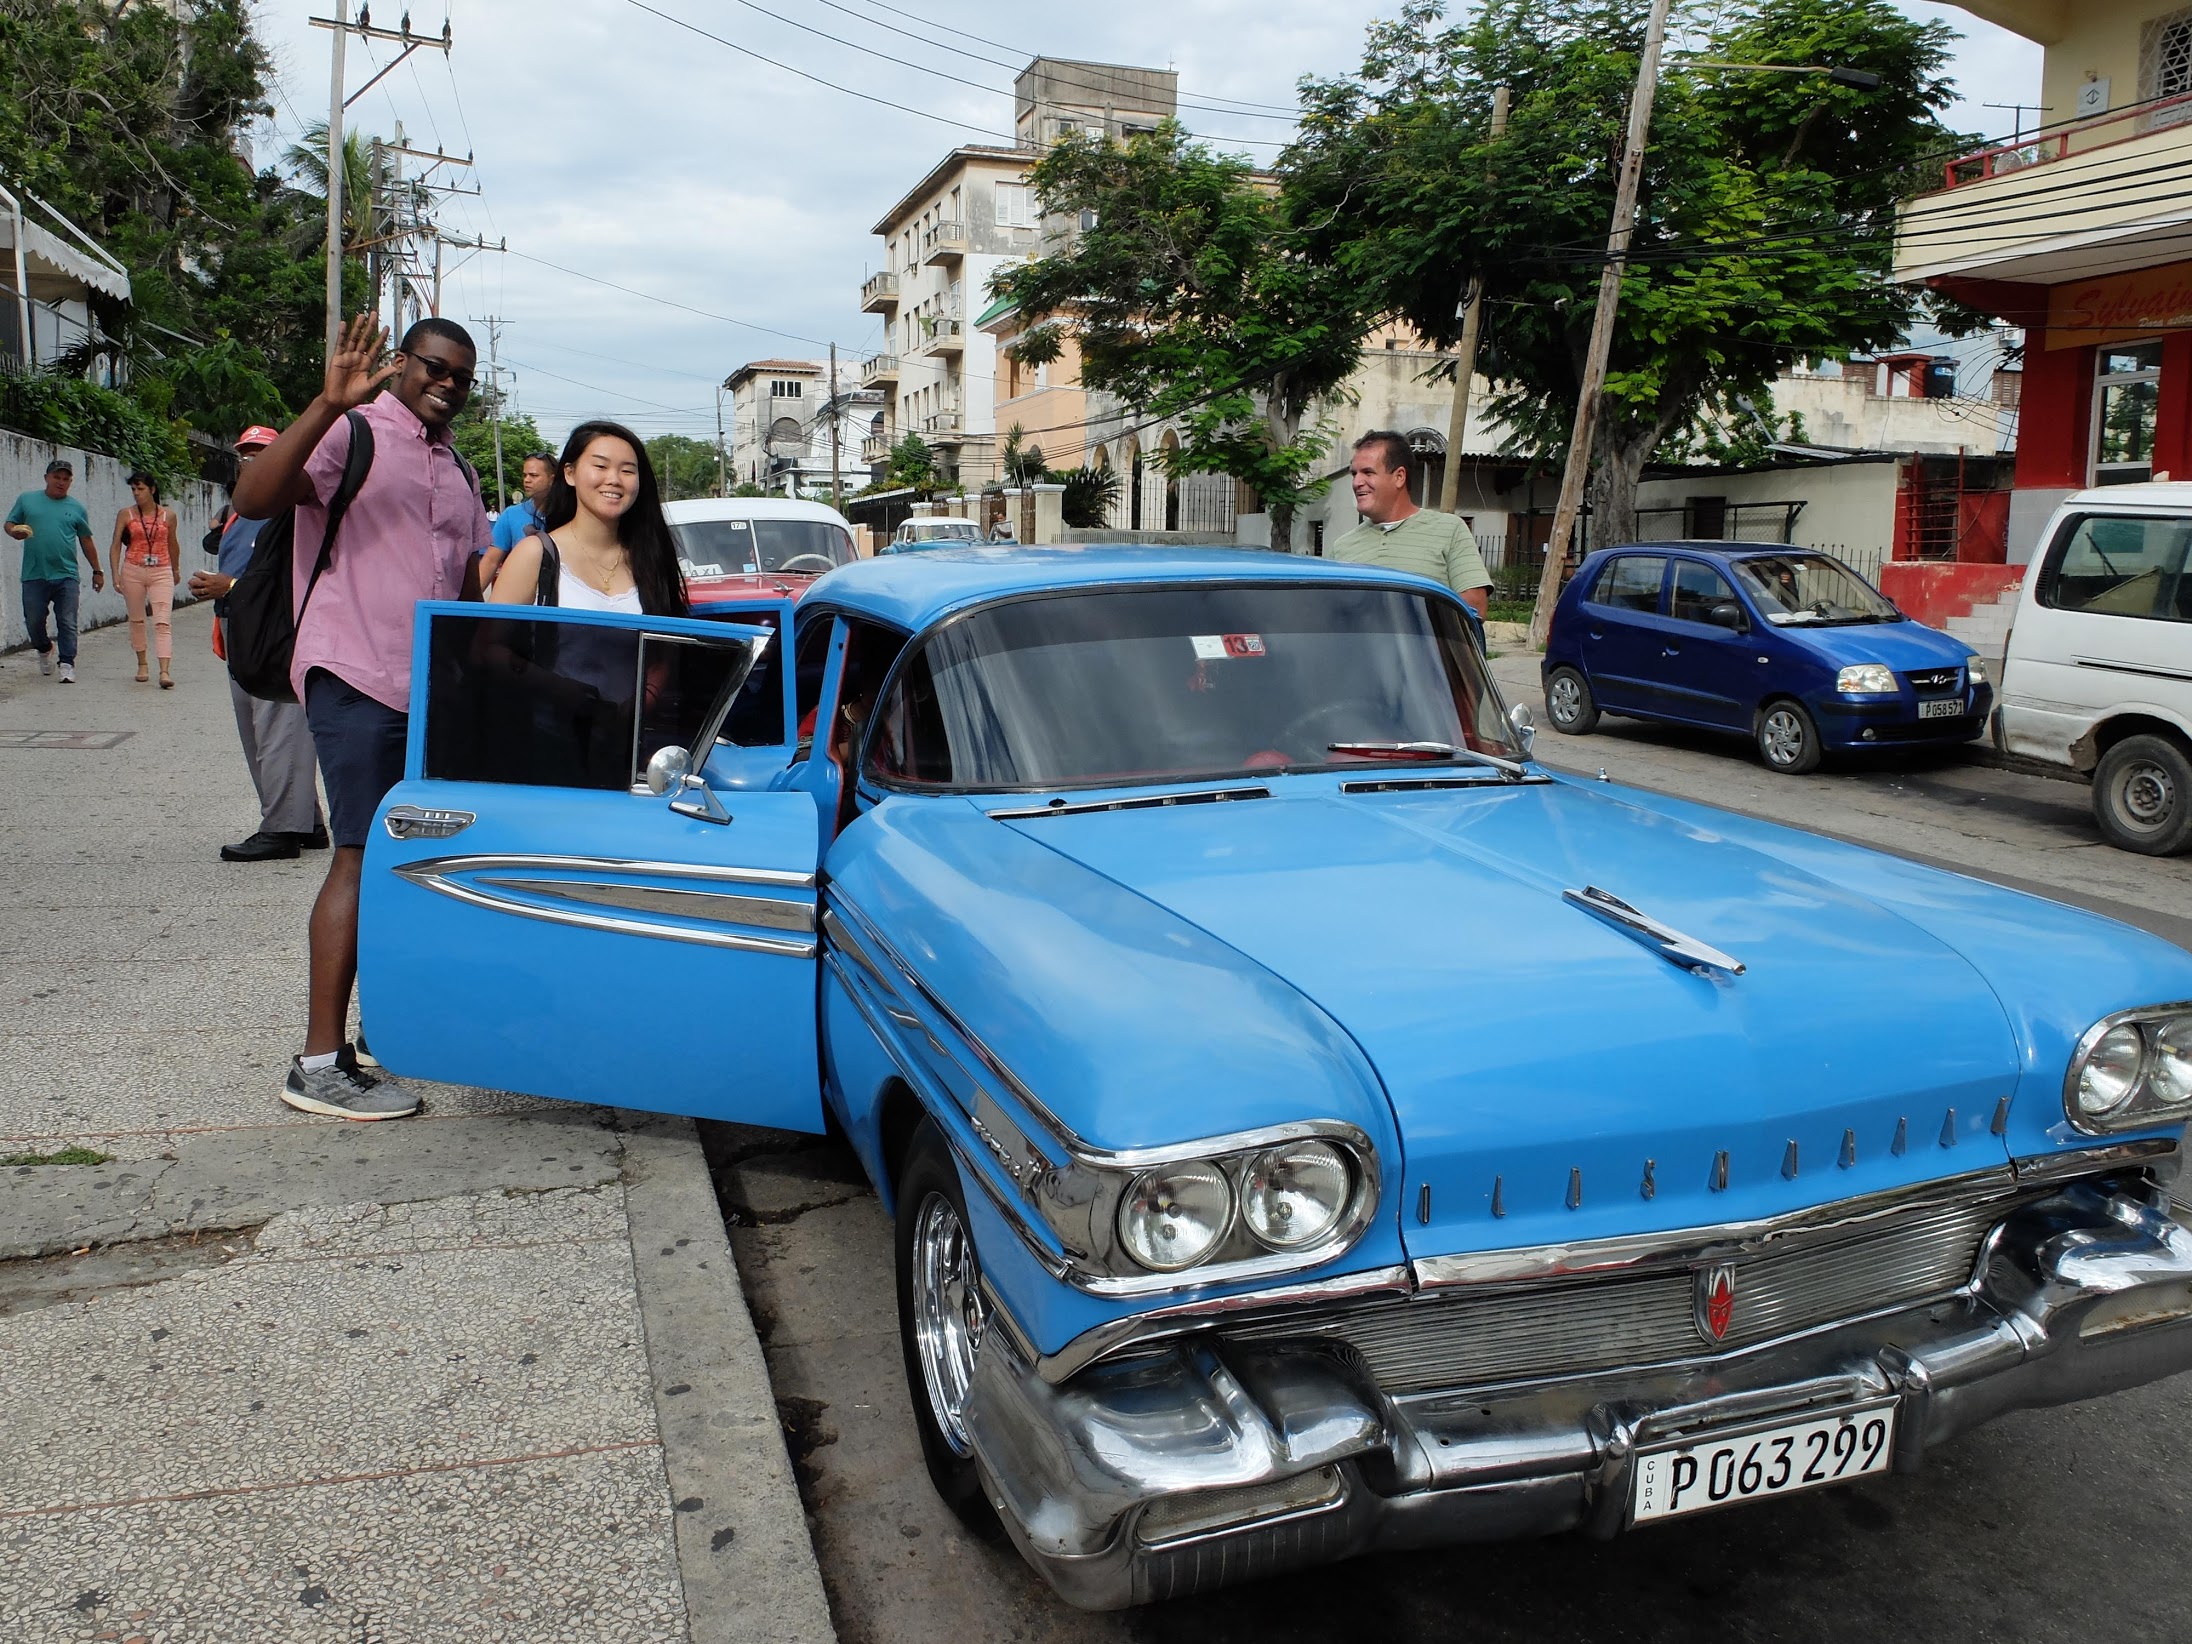 Two-Penn-students-standing-by-classic-bright-blue-Oldsmobile-car-in-Cuba.